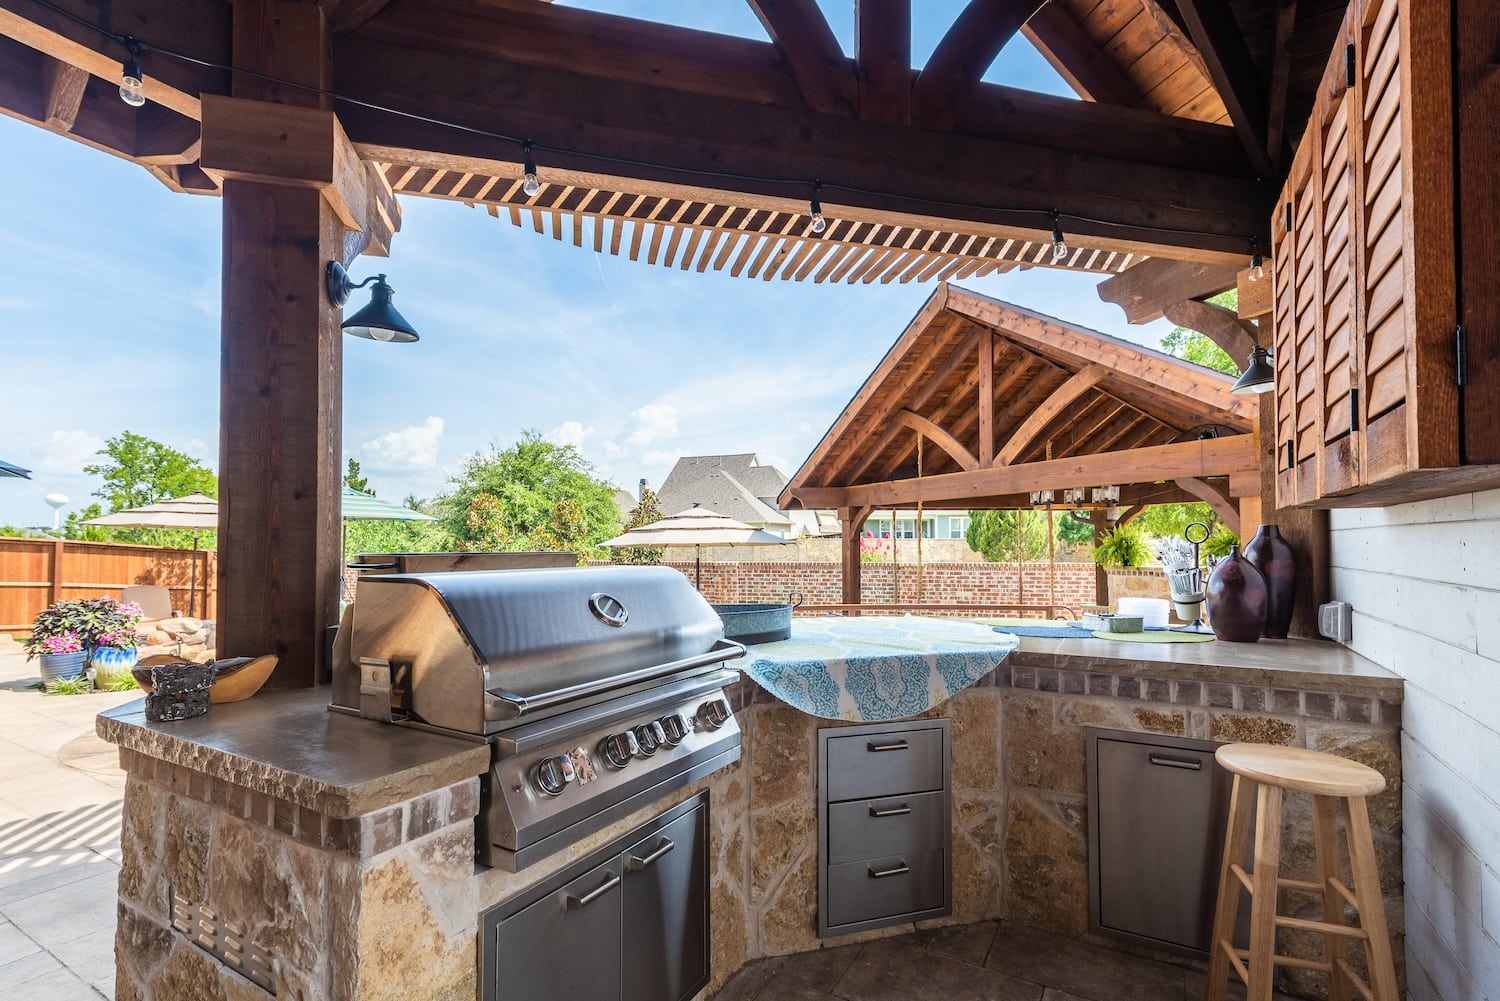 texas best fence and patio covered patio outdoor kitchen05